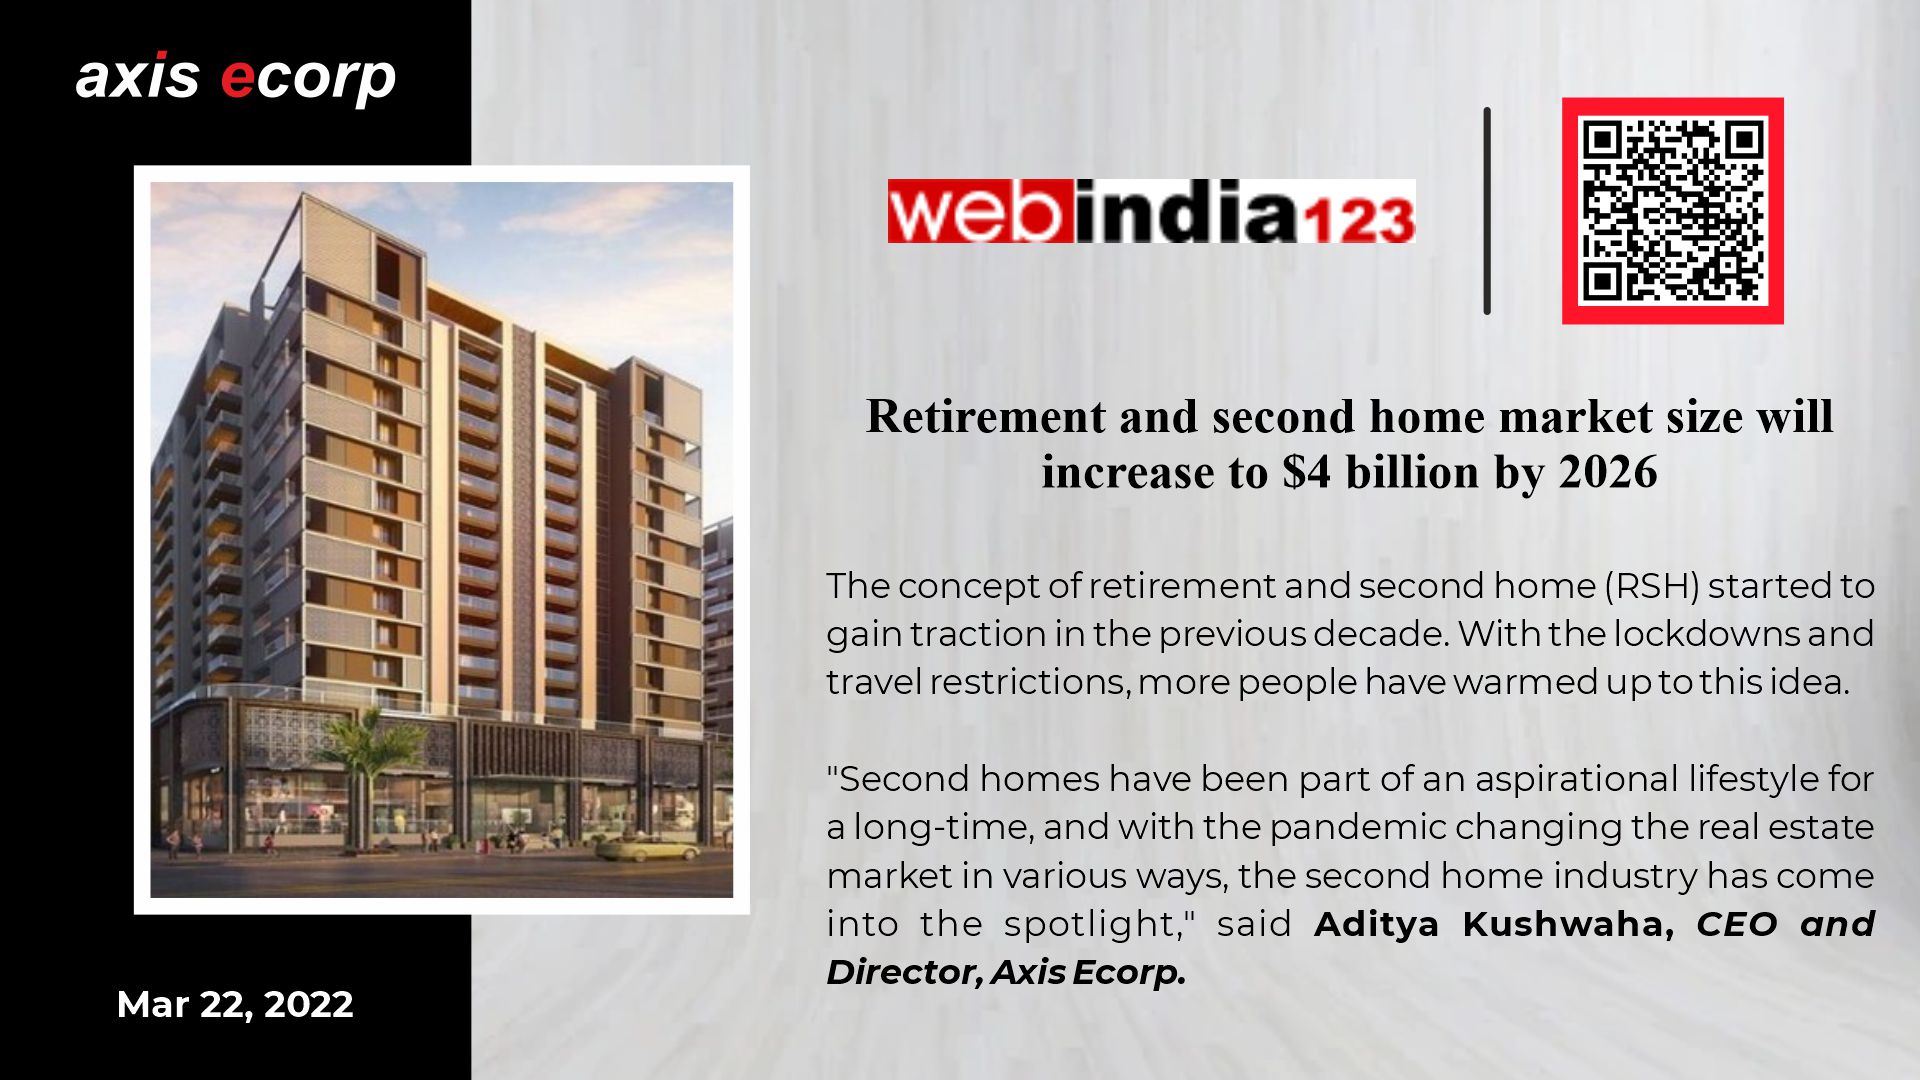 Retirement, second home market size to increase to $4 bn by 2026